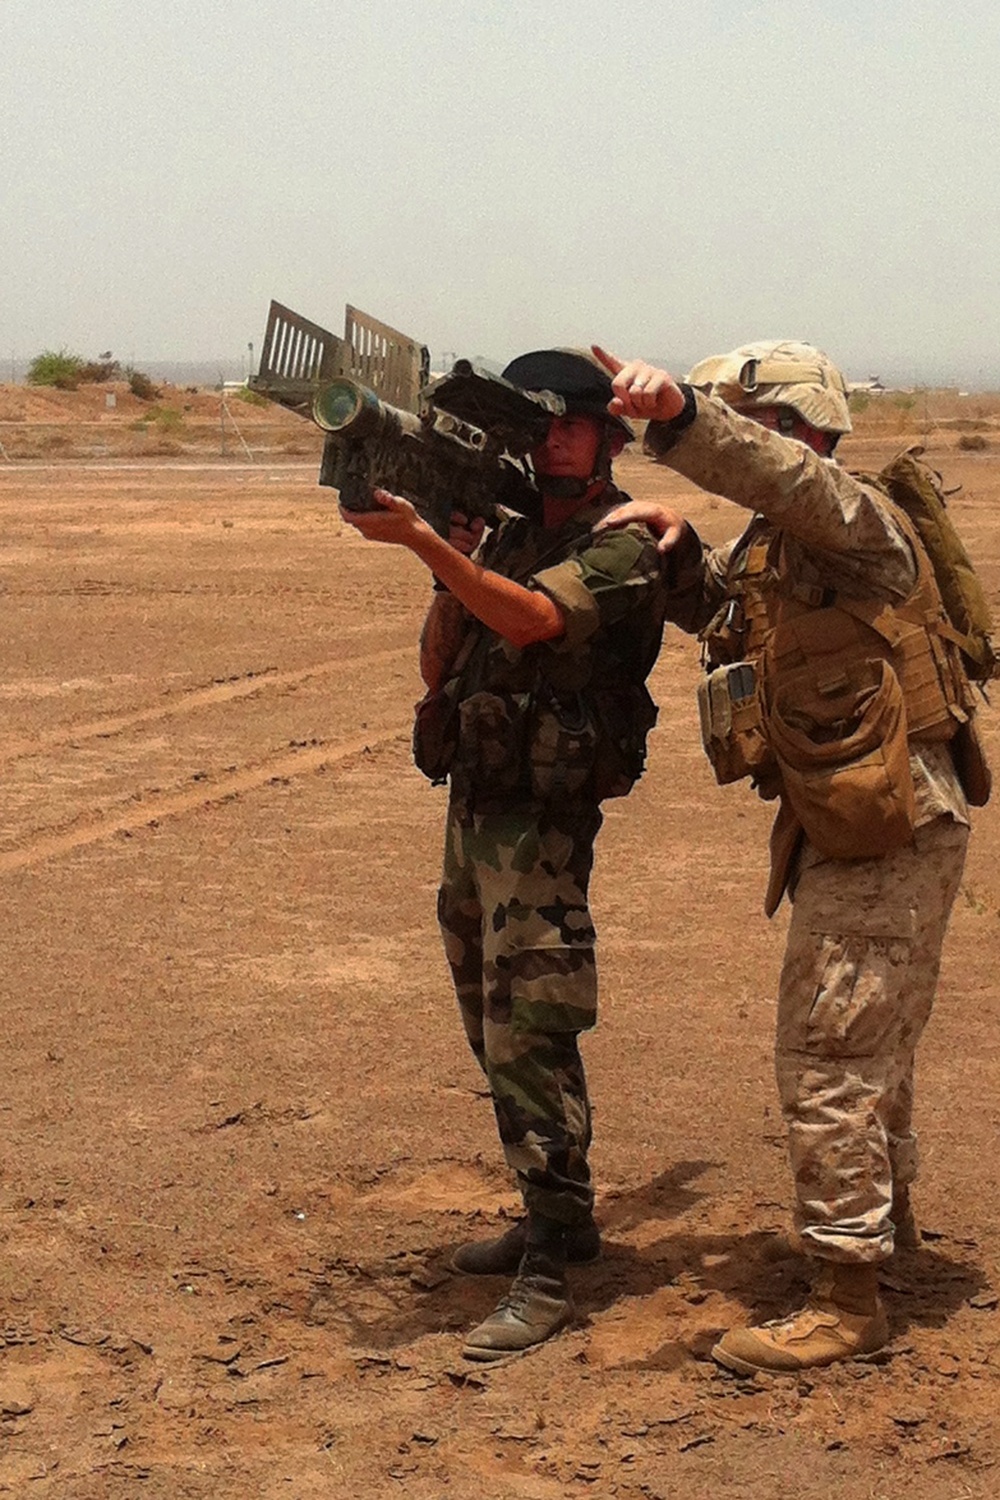 U.S. Marines, French army sight in on air-defense training in Djibouti